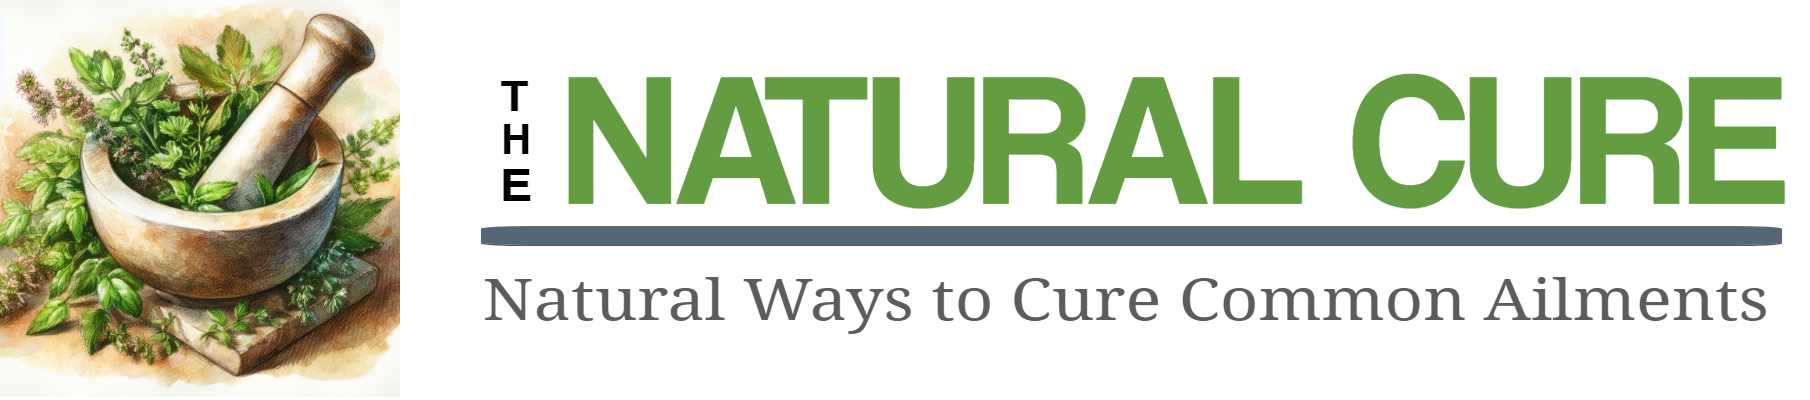 The Natural Cure For Logo https://www.thenaturalcurefor.com/